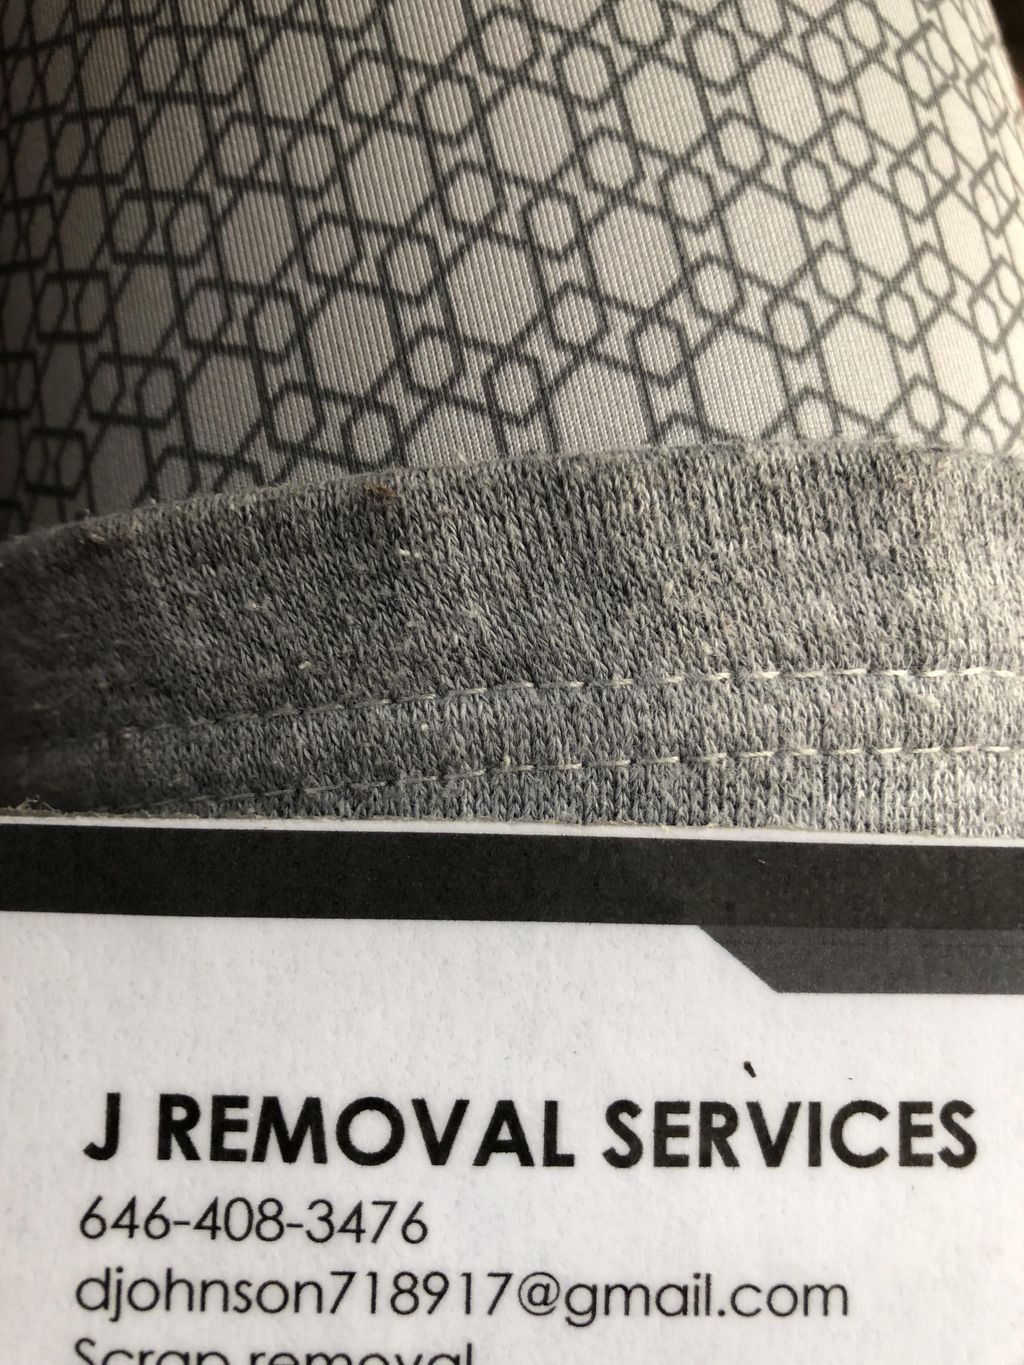 J REMOVAL SERVICES